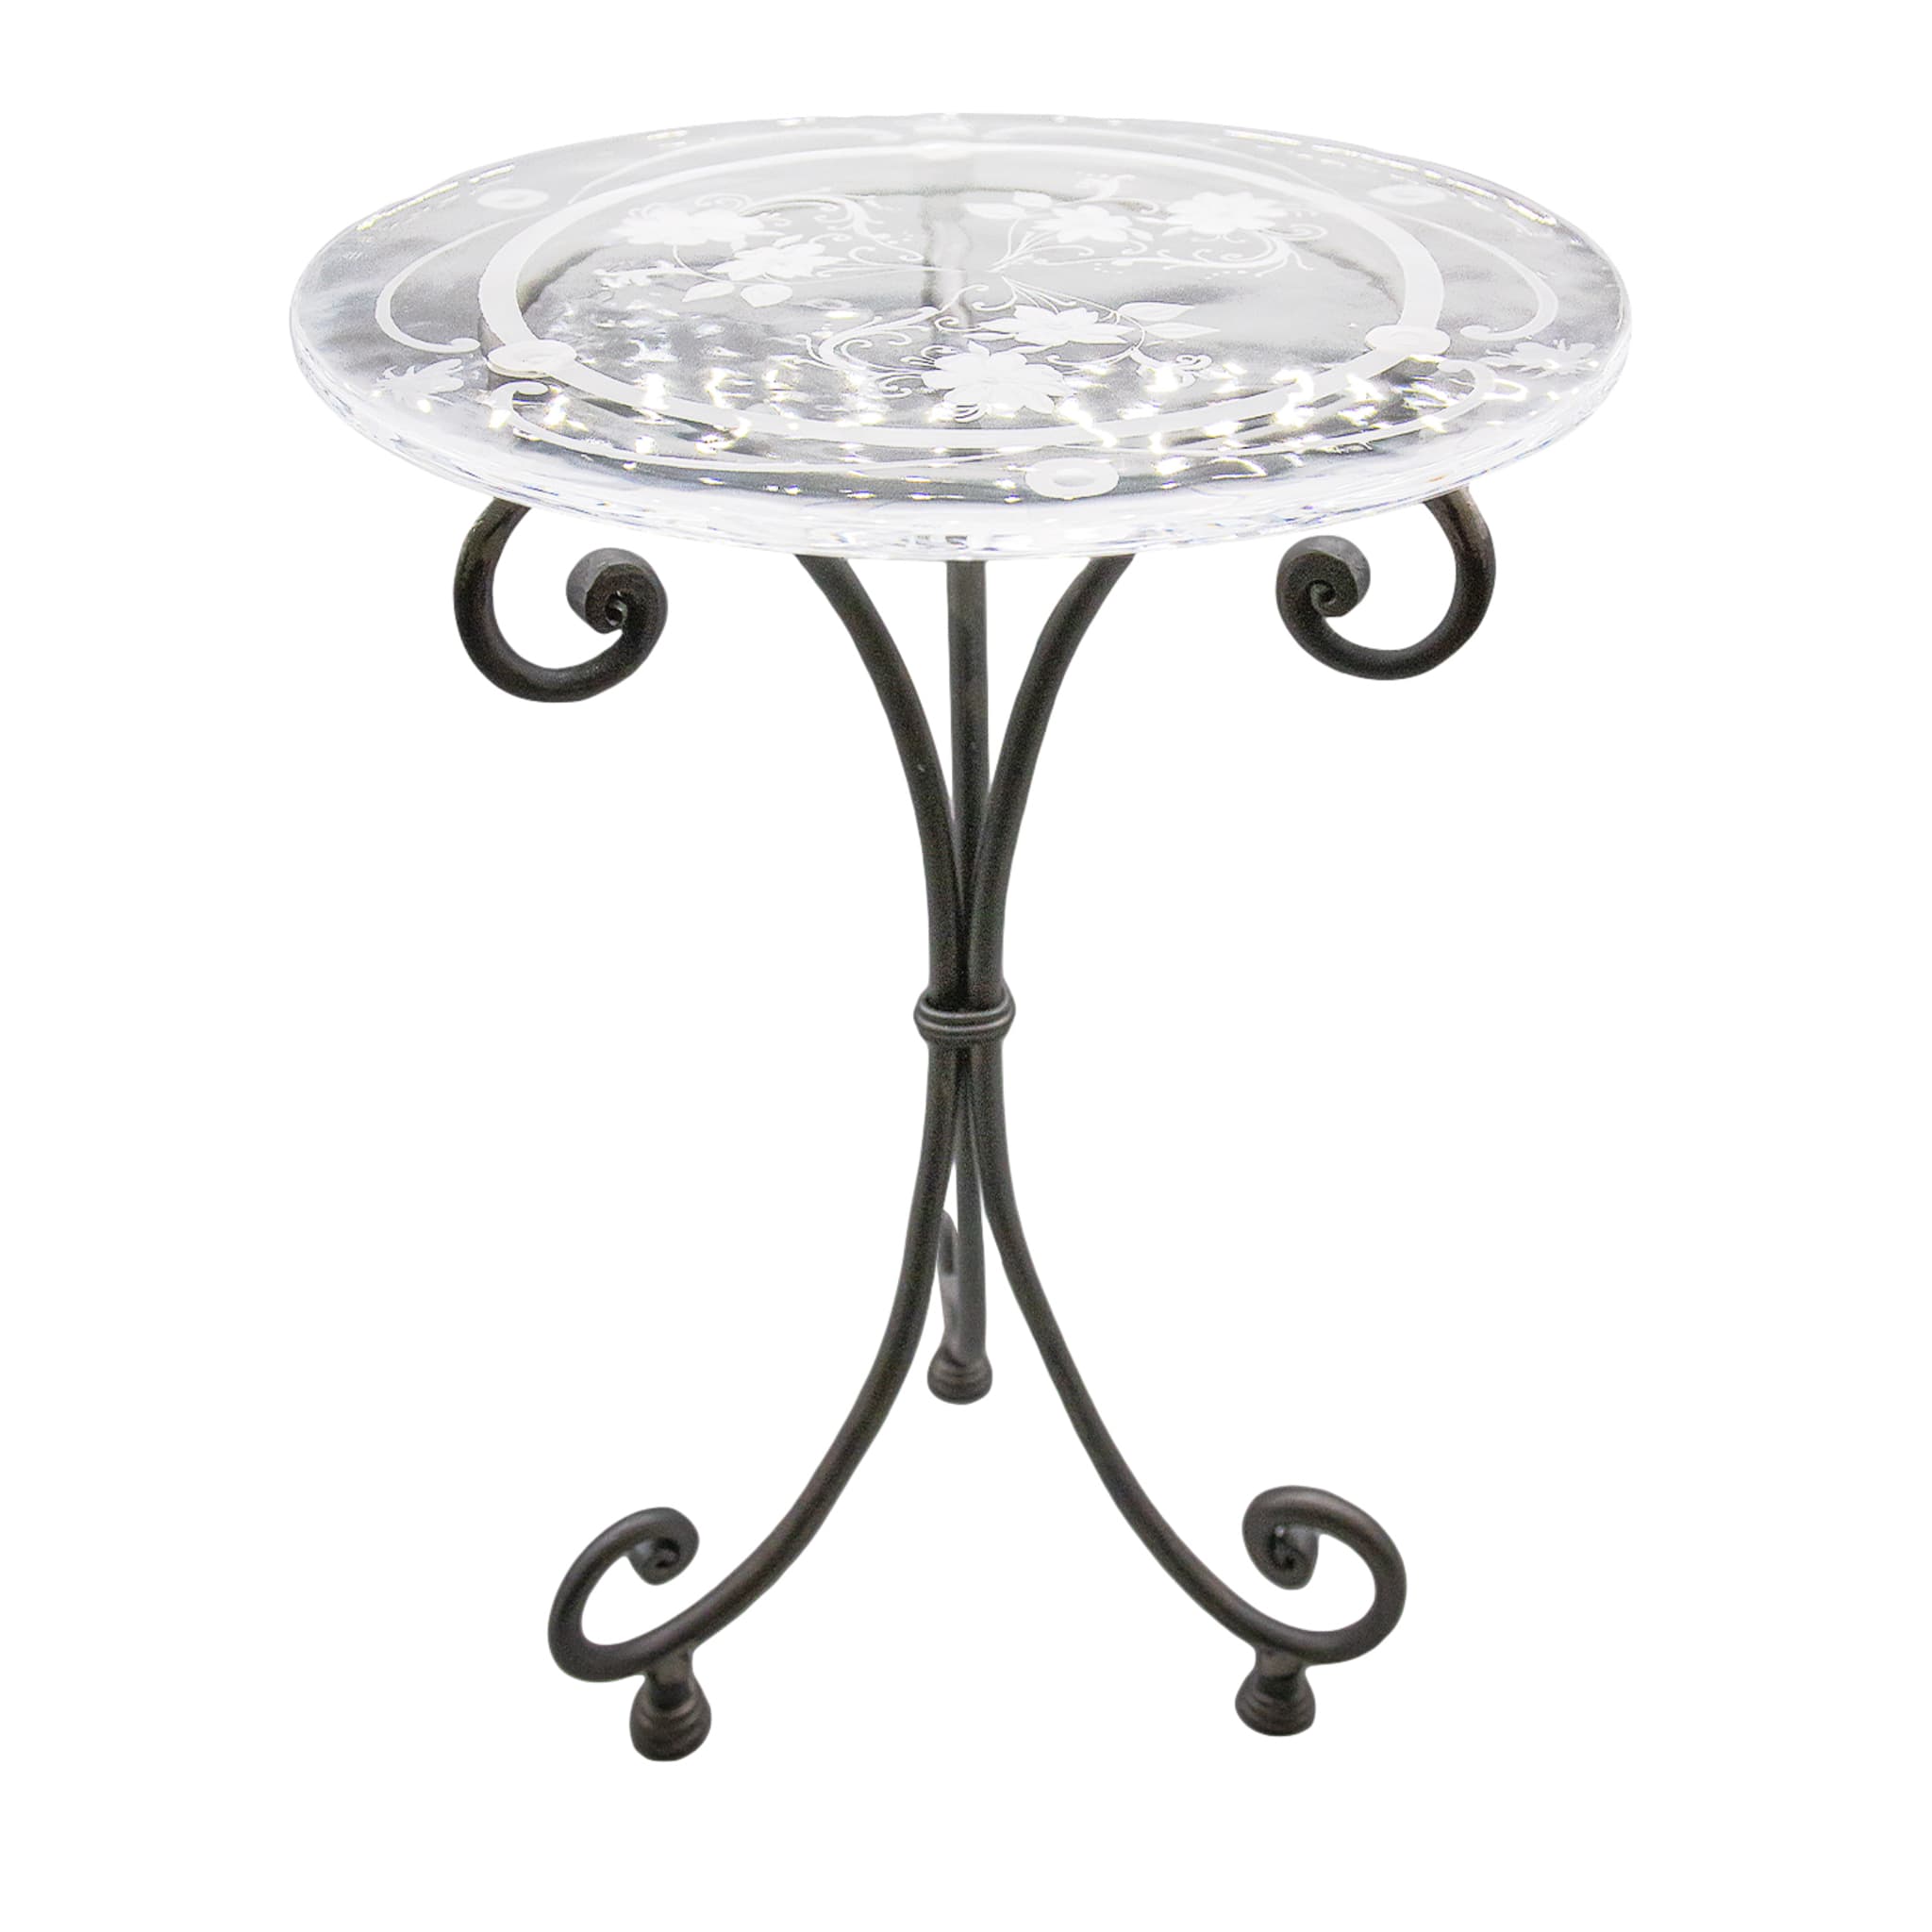 Art-Deco-Style Round Accent Table - Main view